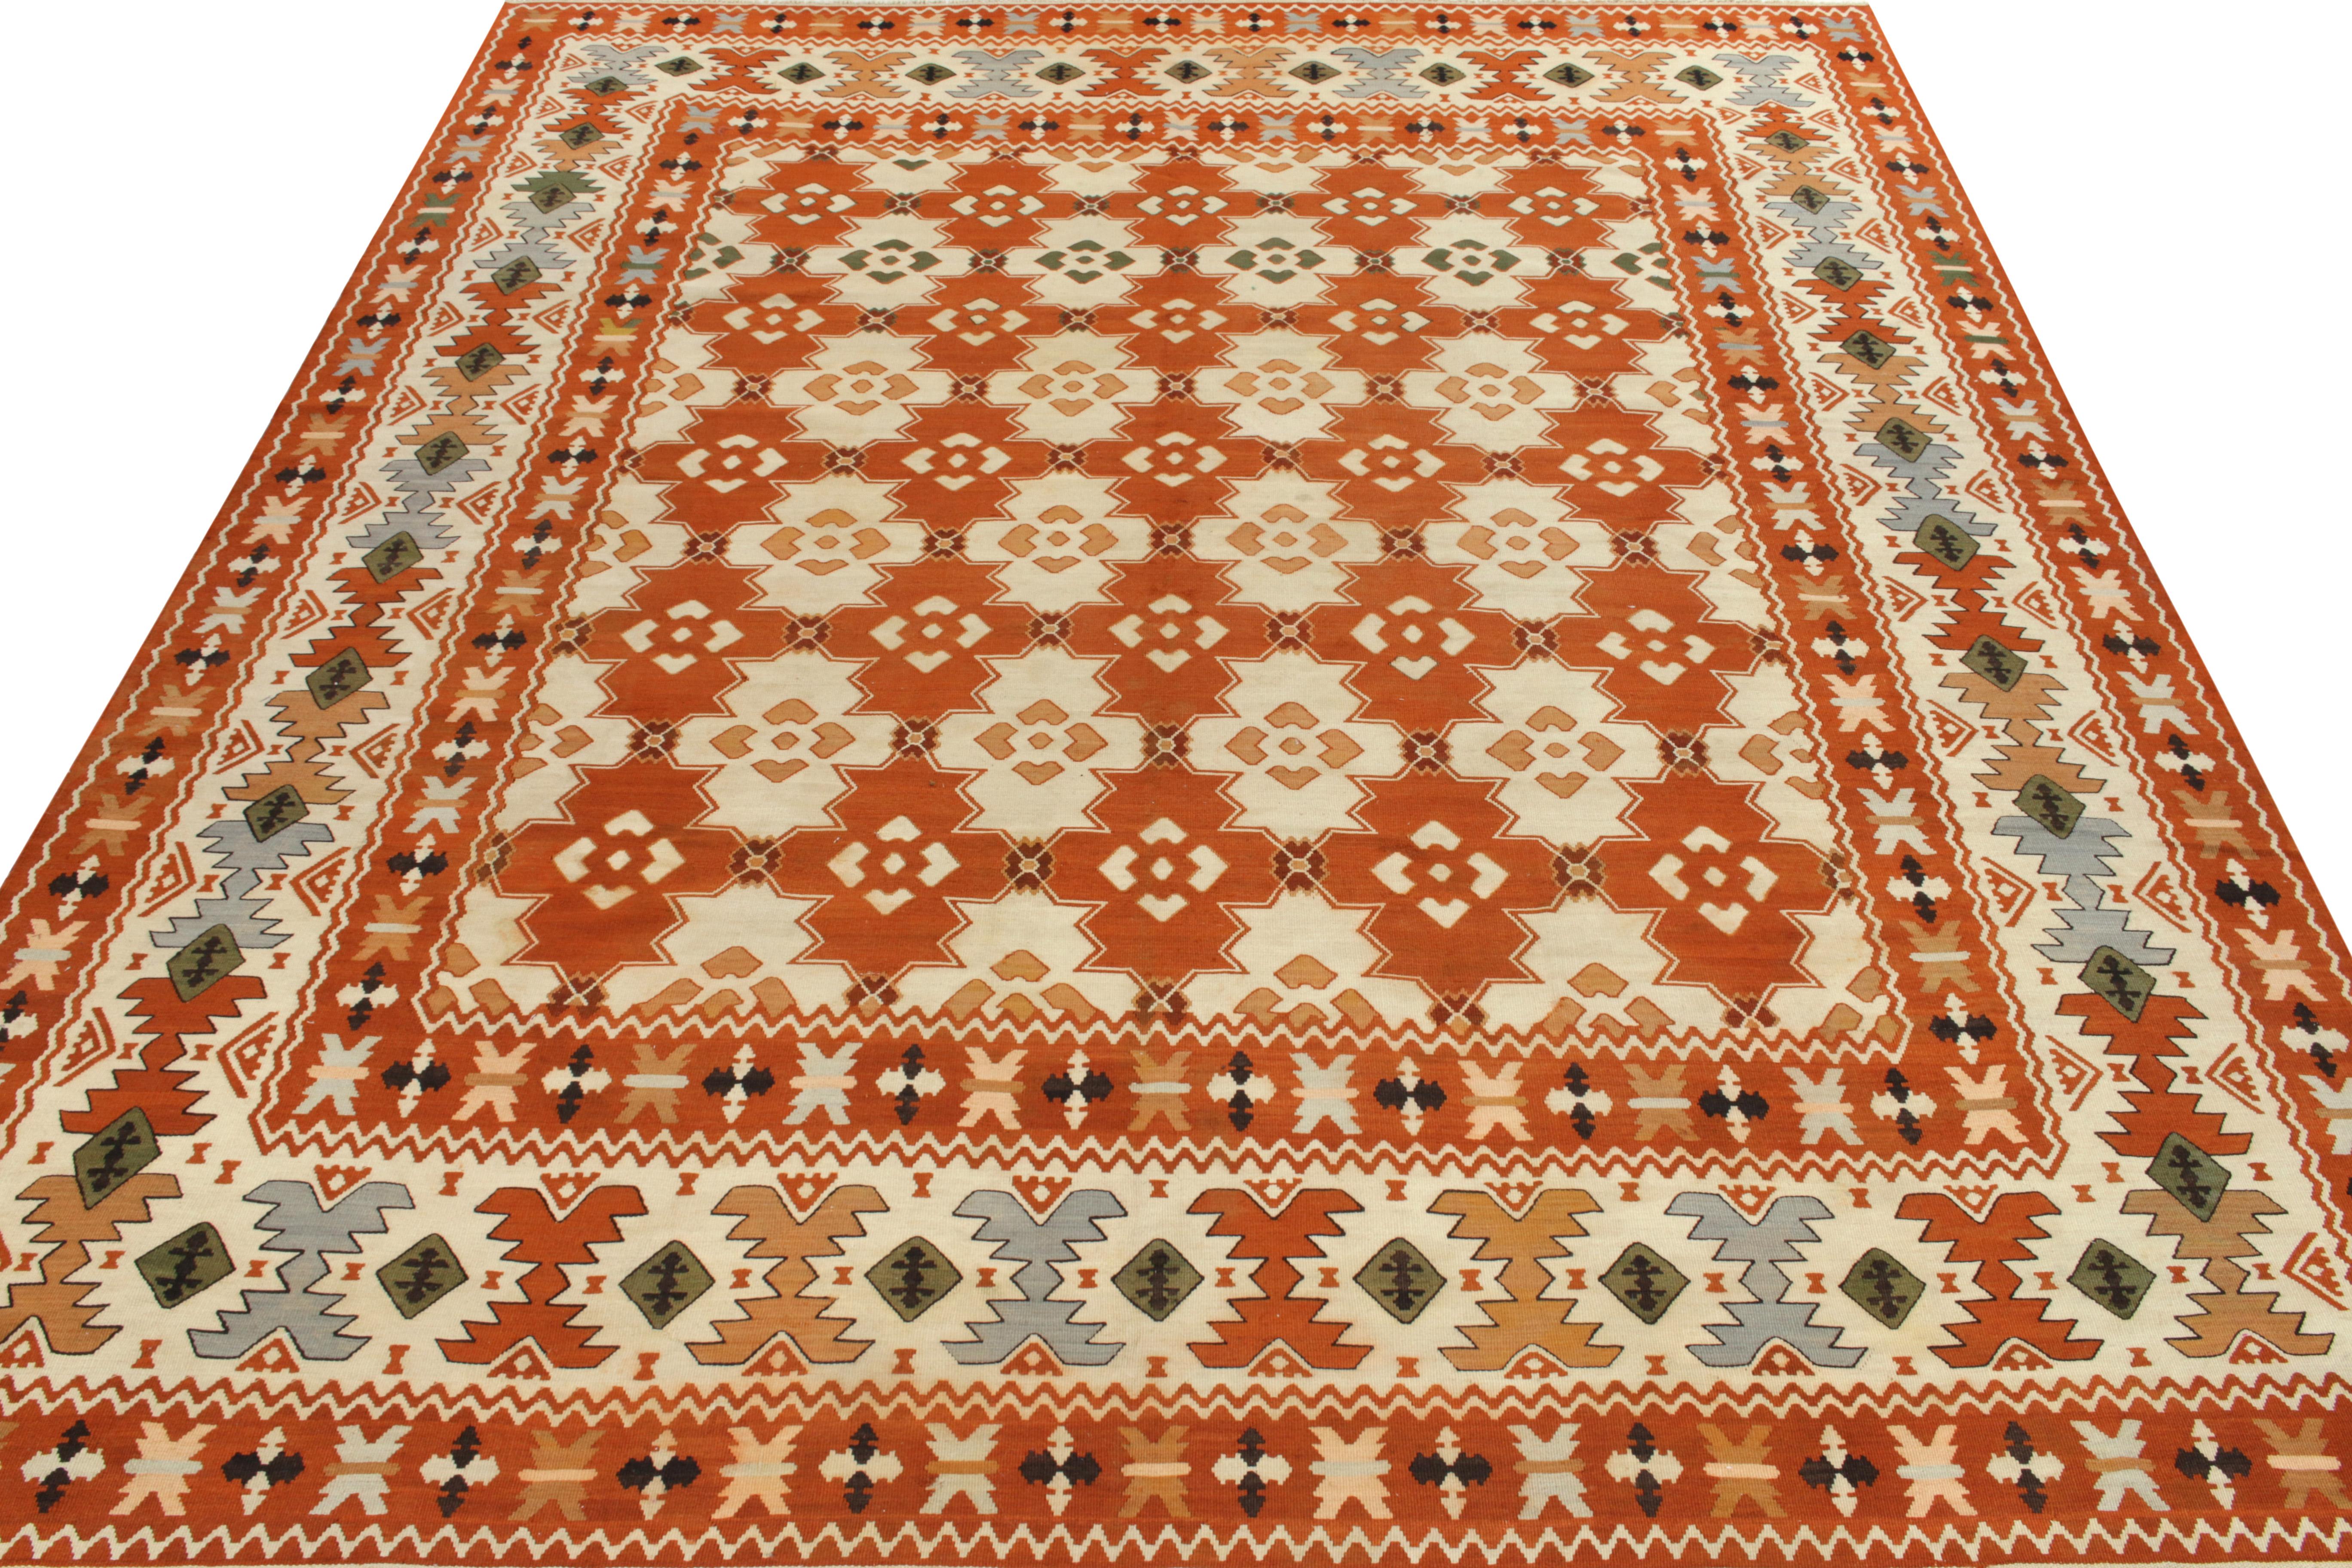 Handwoven in wool originating from Turkey circa 1950-1960, a vibrant vintage Balkan flatweave rug enjoying nomadic sensibilities entering our Kilim & Flatweave collection. The field features a tribal geometric pattern in bright tangerine & stark